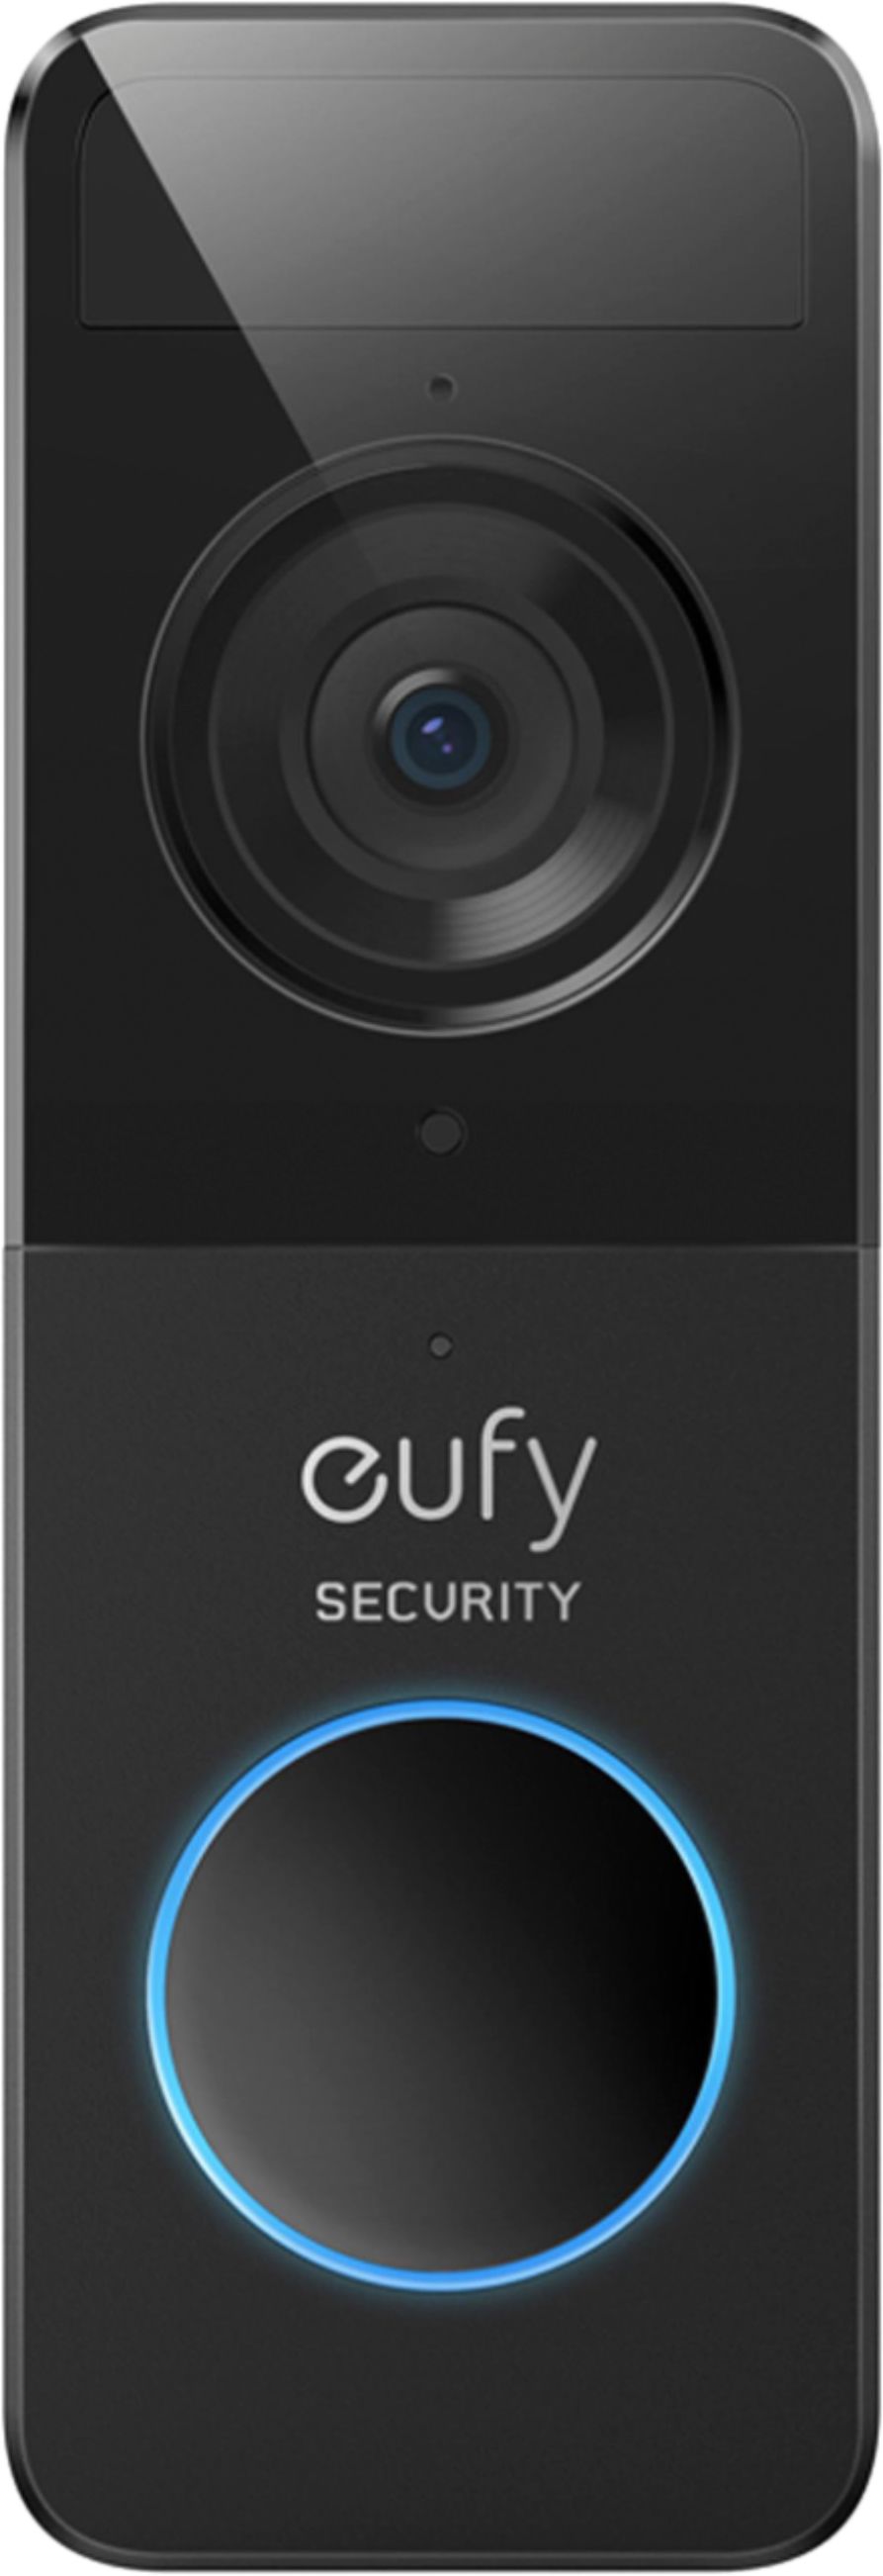 eufy Security Smart Wi-Fi Video Doorbell 2K Battery Operated/Wired with  Chime White/Black T8212111 - Best Buy